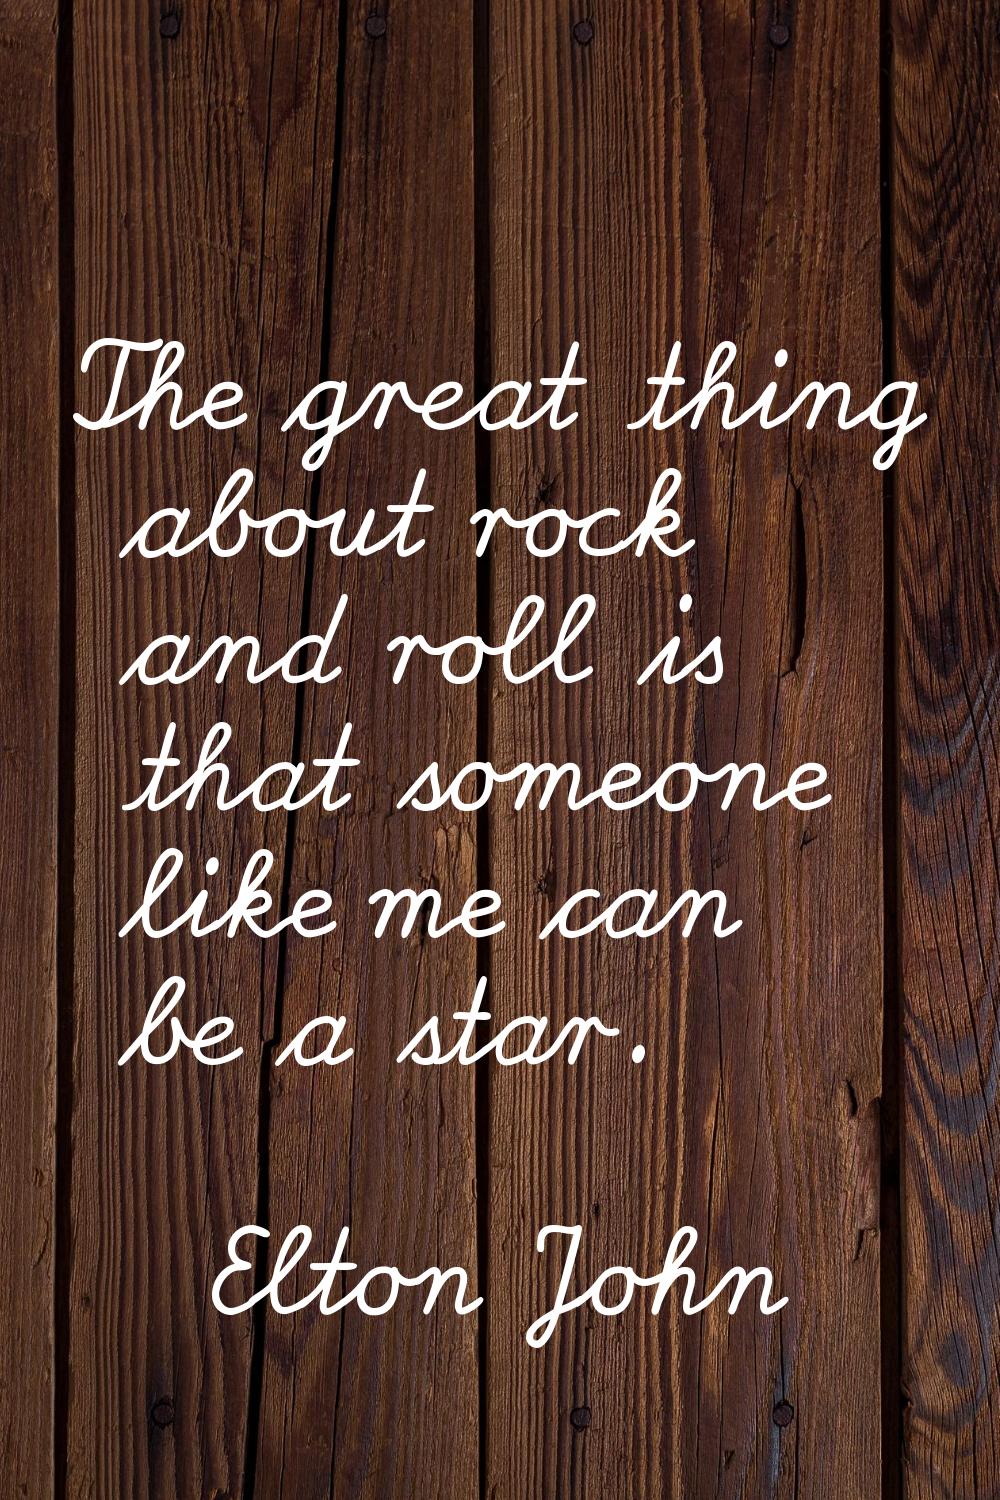 The great thing about rock and roll is that someone like me can be a star.